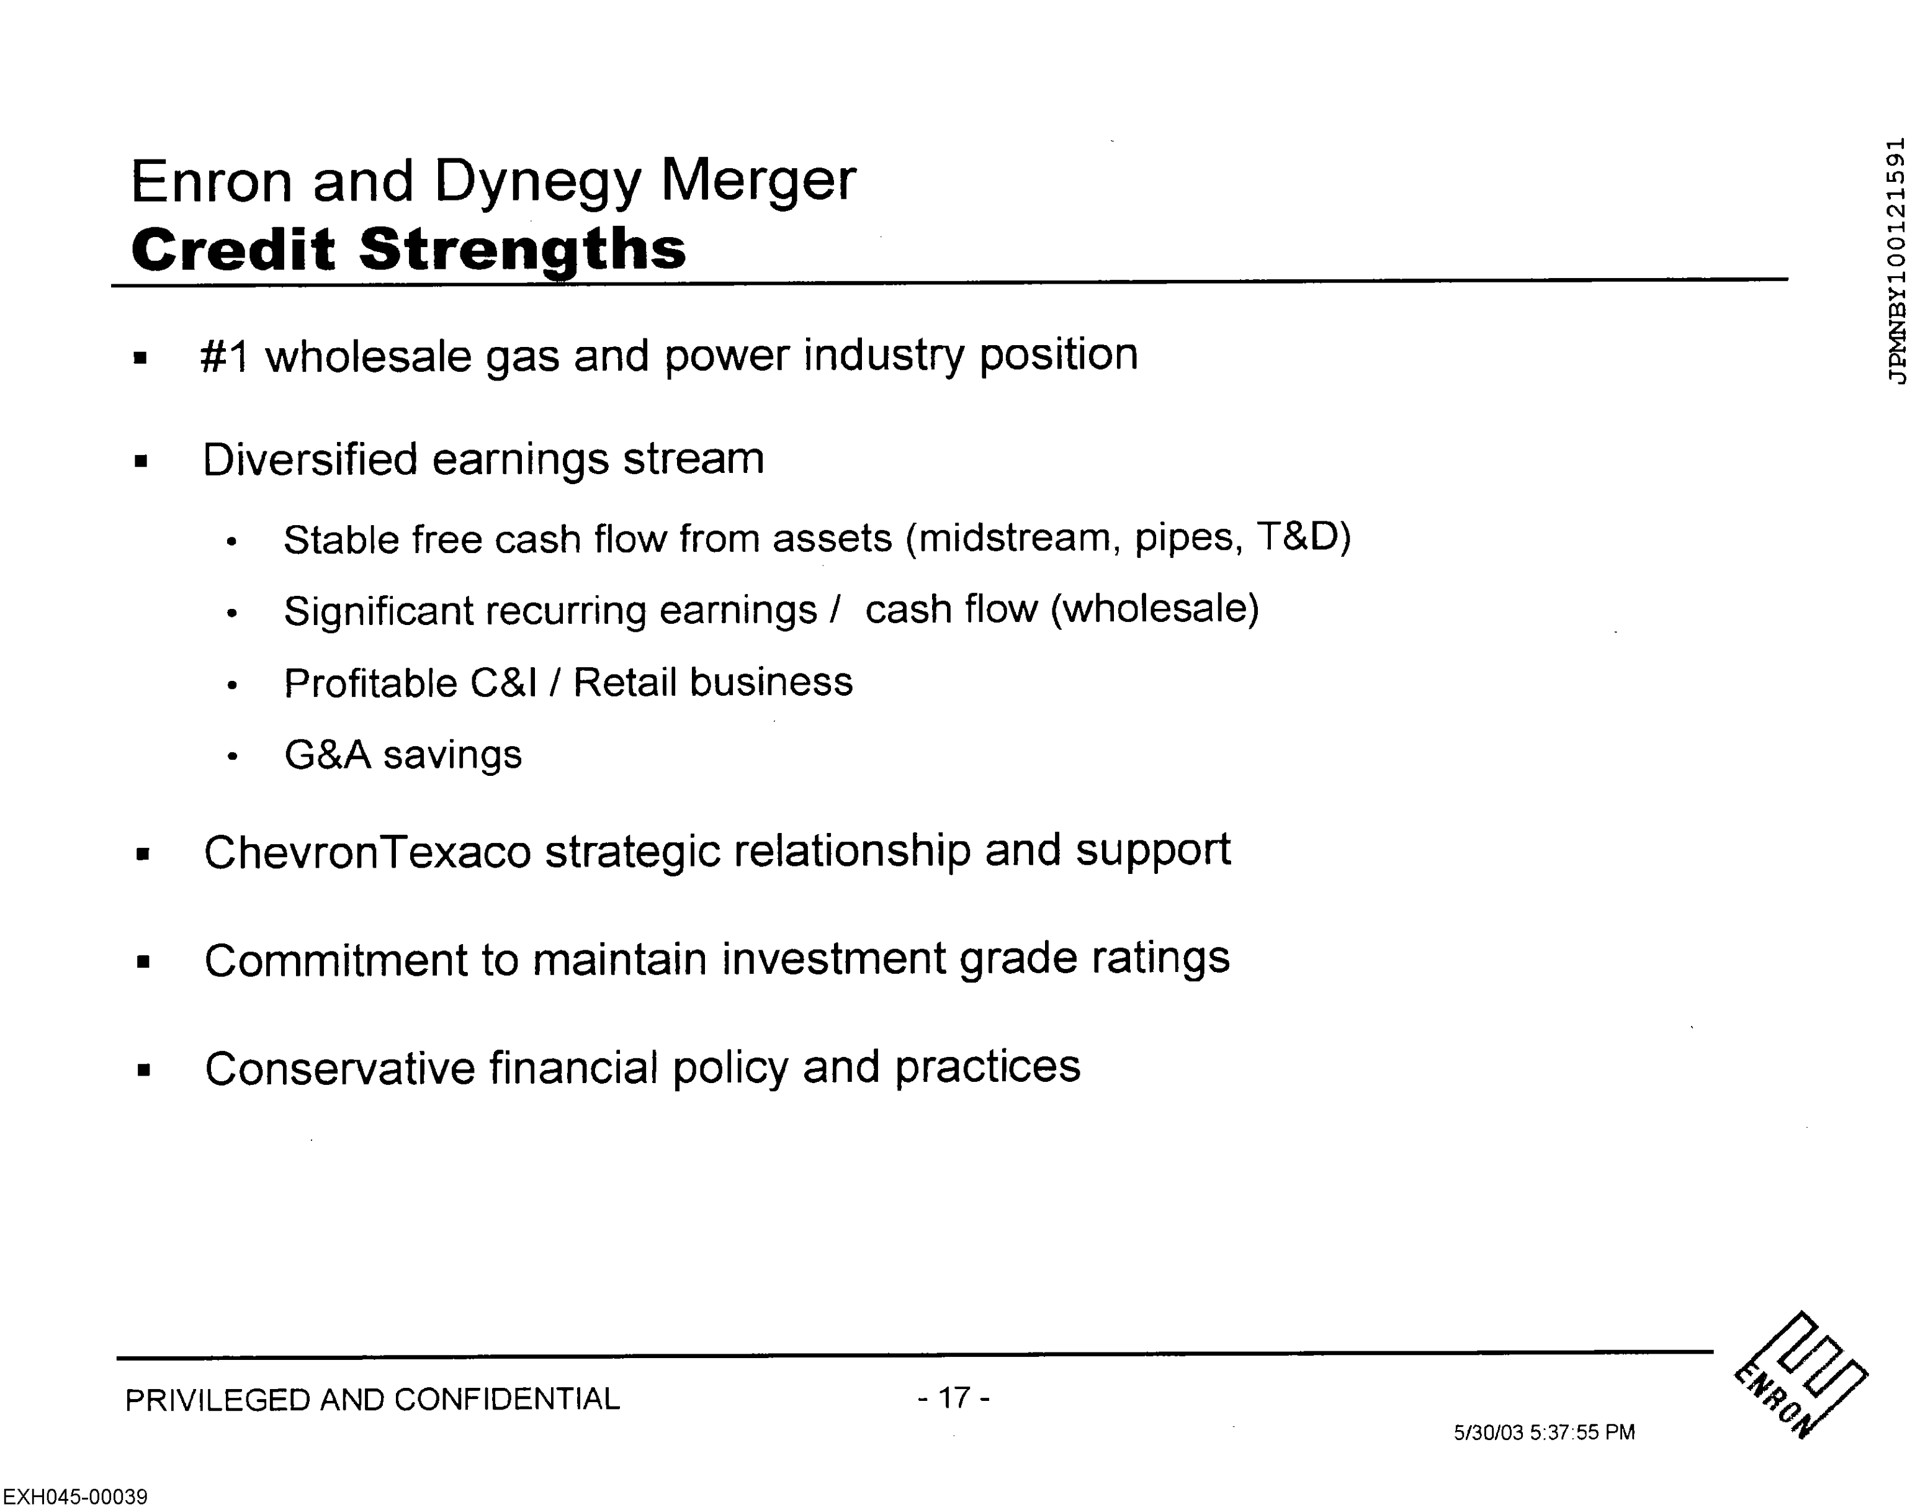 and merger credit strengths | Enron